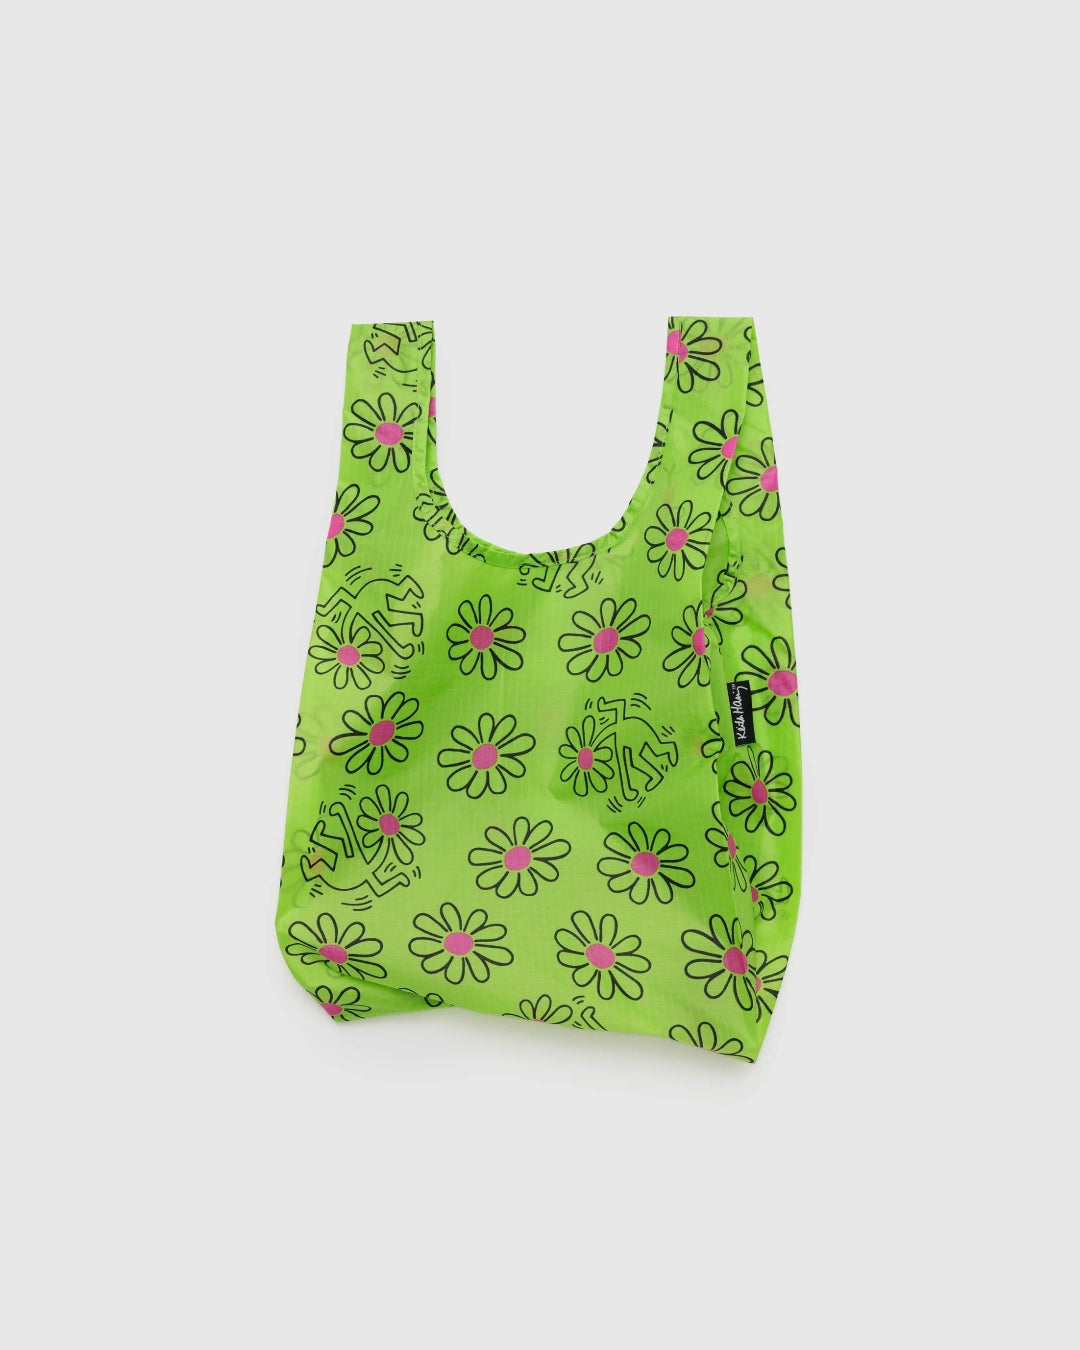 Baby Reusable Bag - Keith Haring Flower [PRE ORDER]